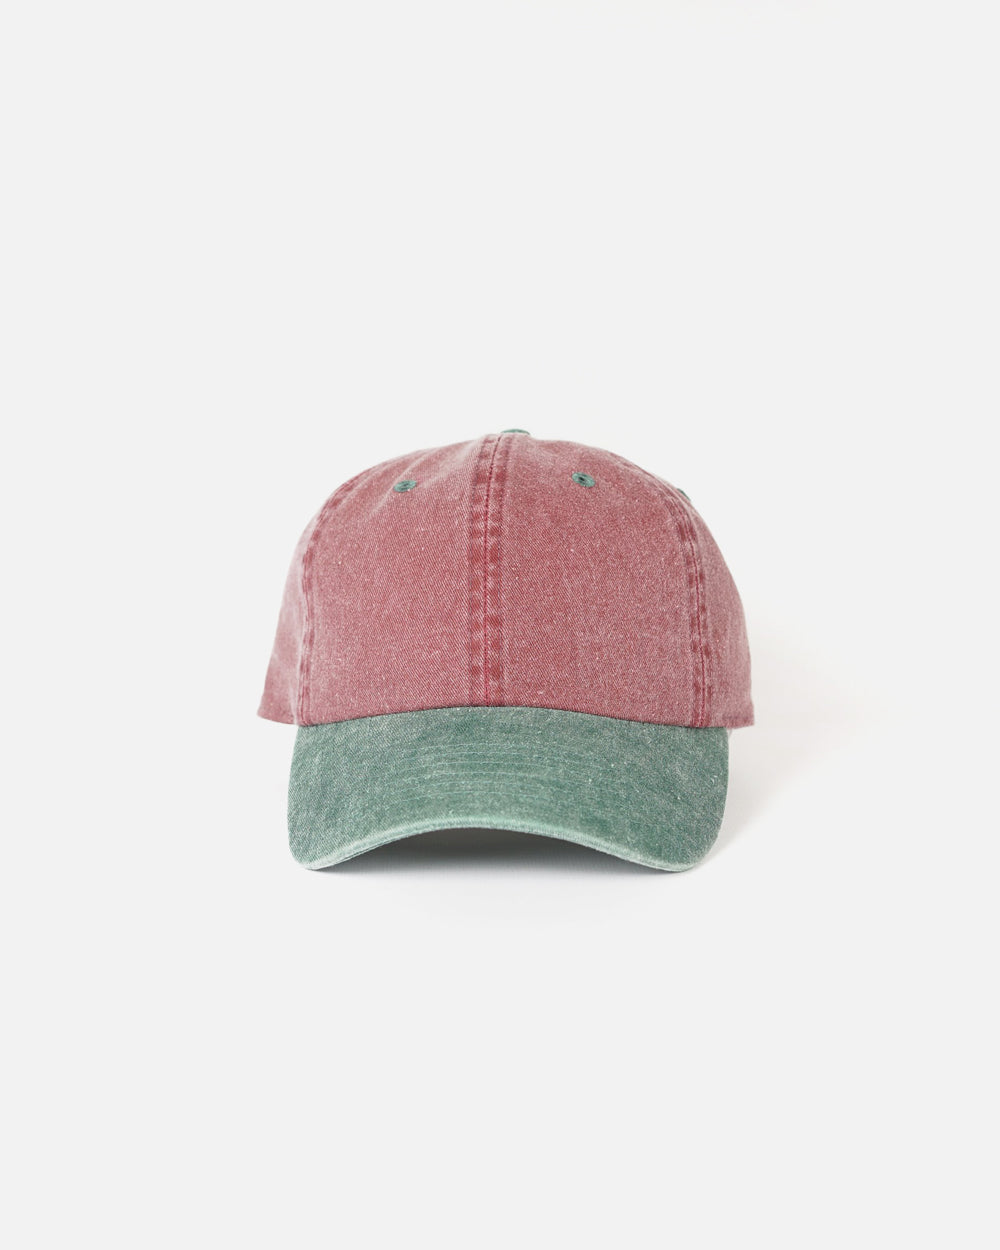 Washed Cotton 6-Panel Cap Burgundy x Green